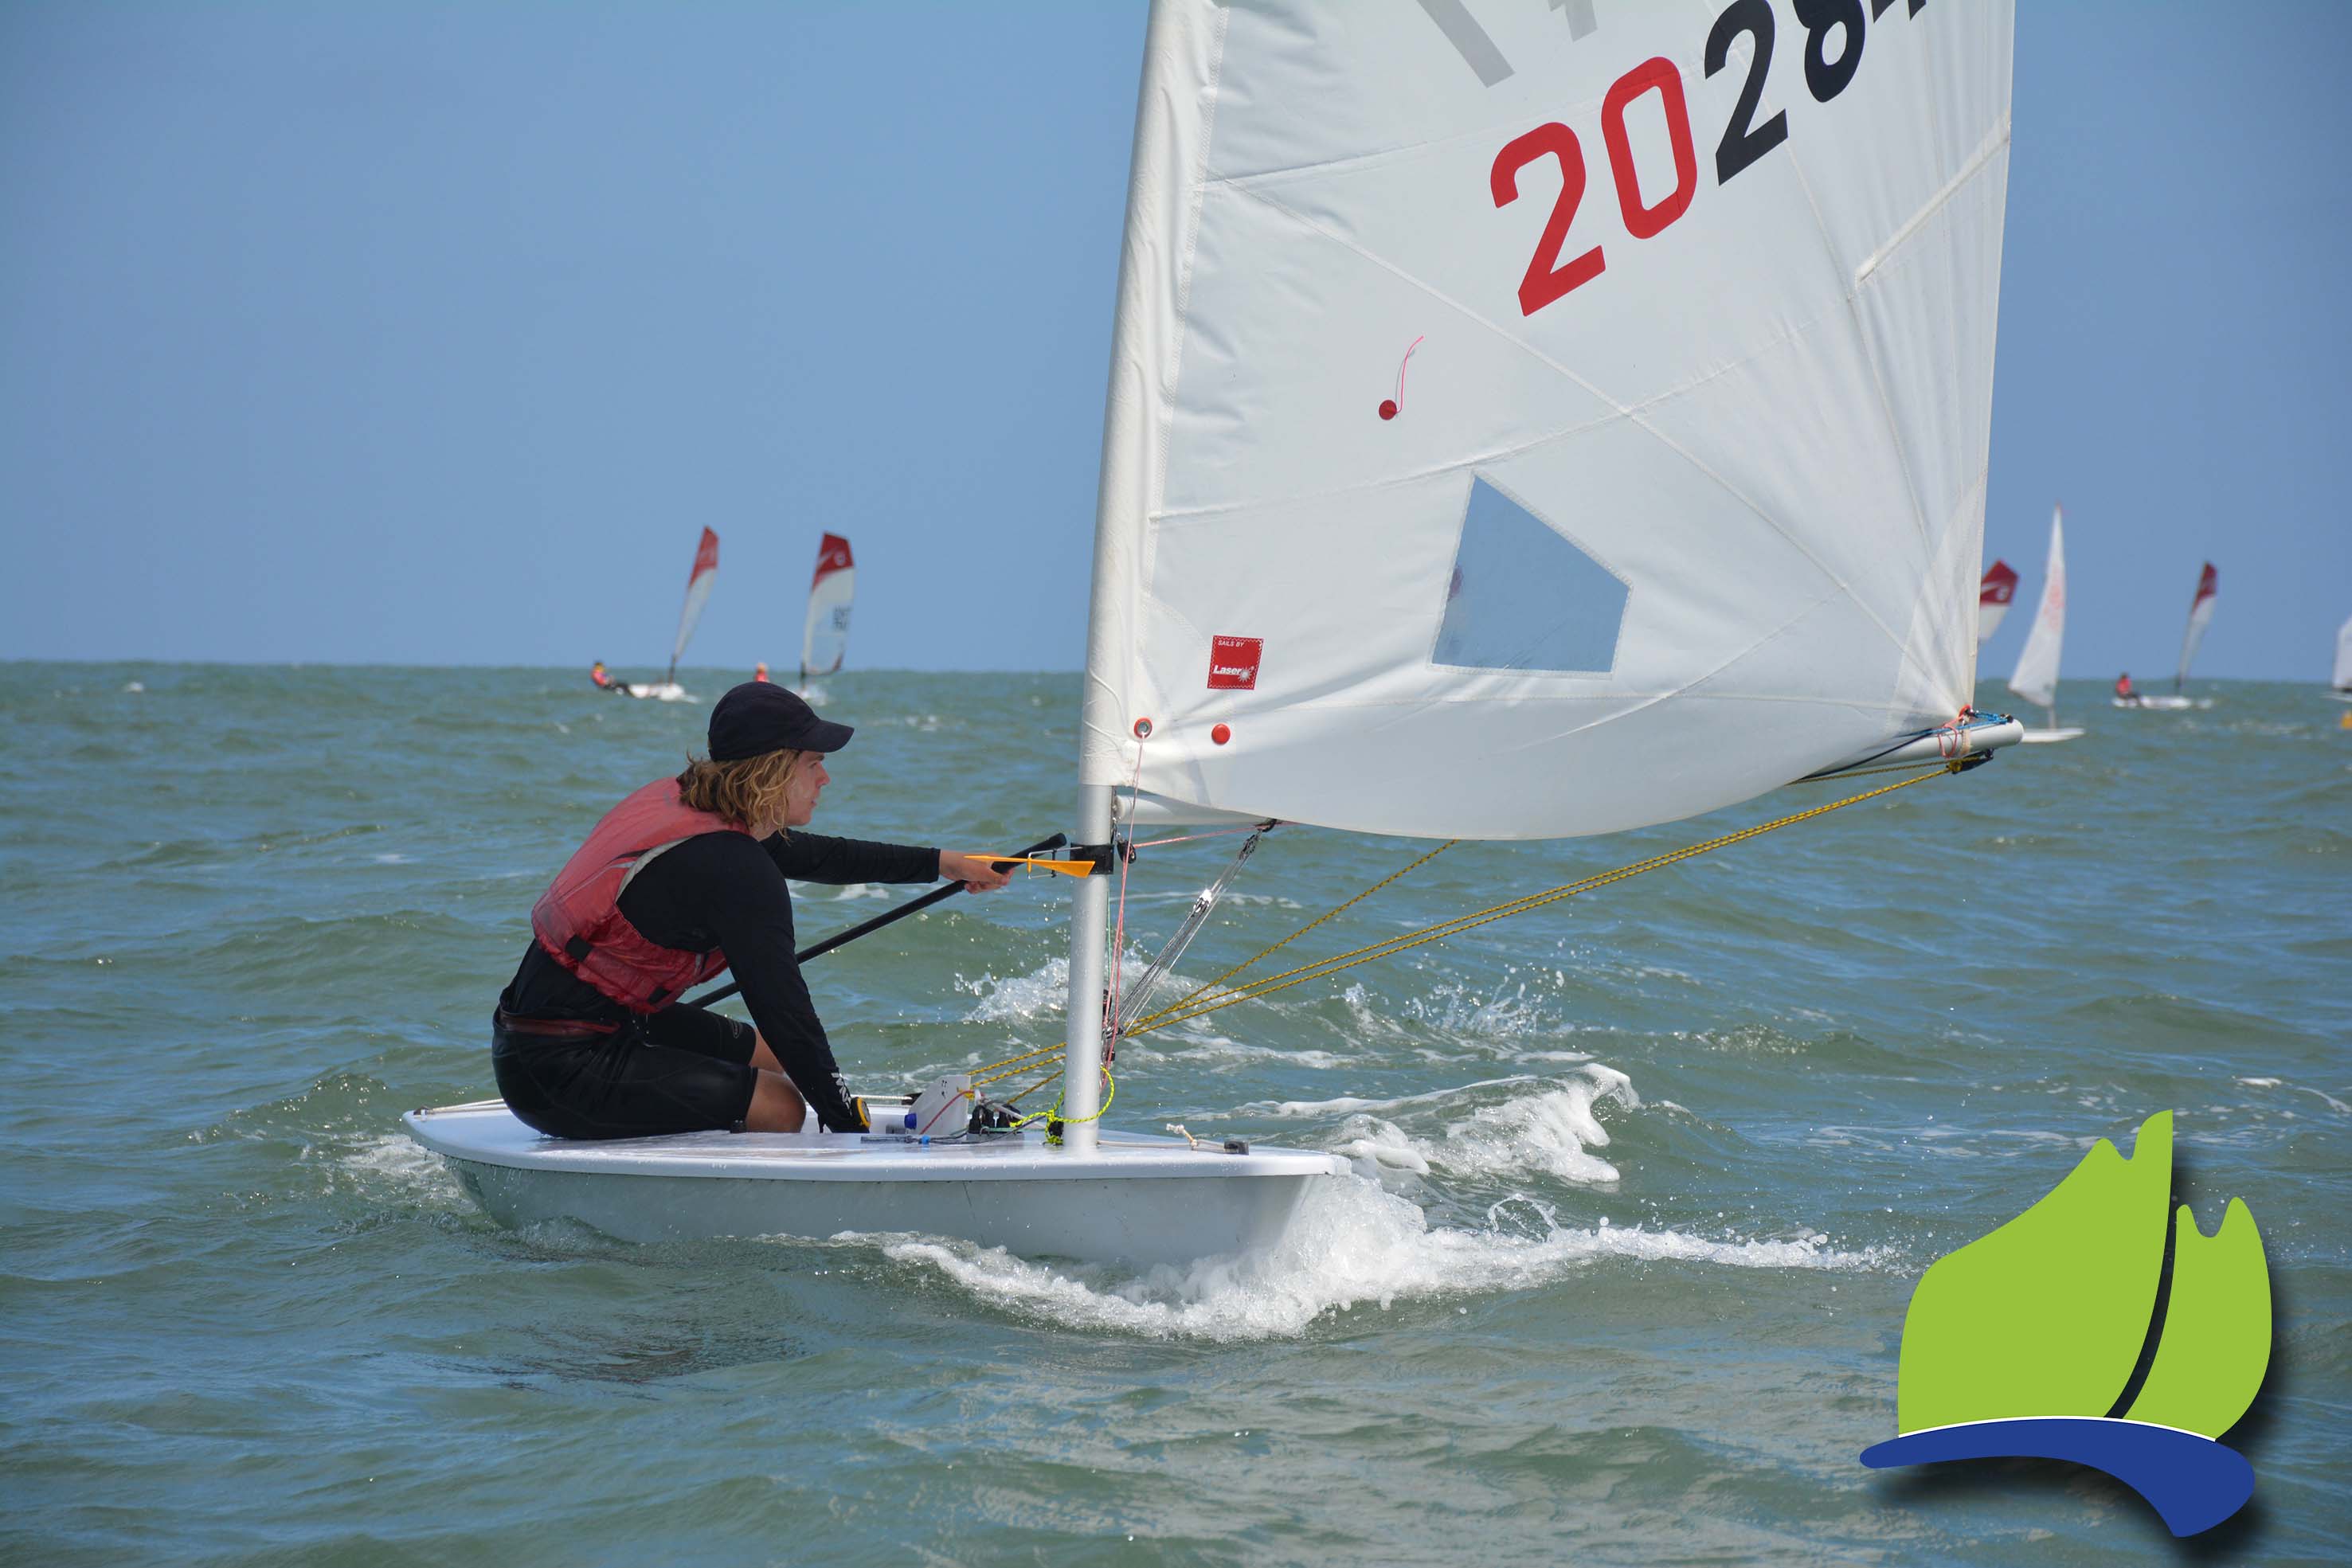 John Gordon was the overall winner in the Laser Radial fleet at the weekend.